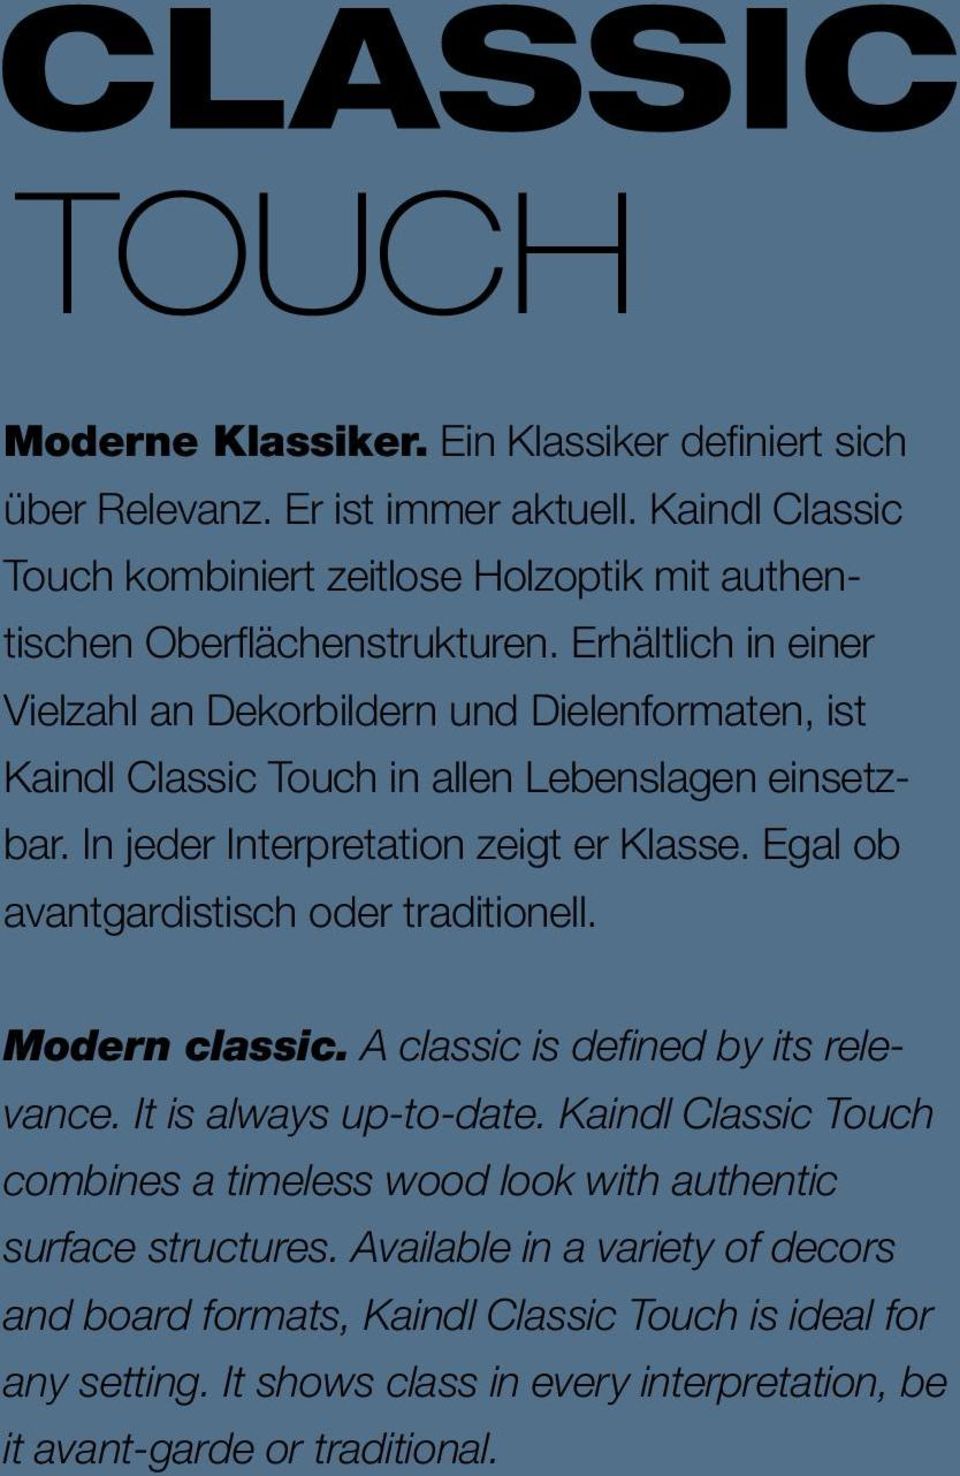 Egal ob avantgardistisch oder traditionell. Modern classic. A classic is defined by its relevance. It is always up-to-date.